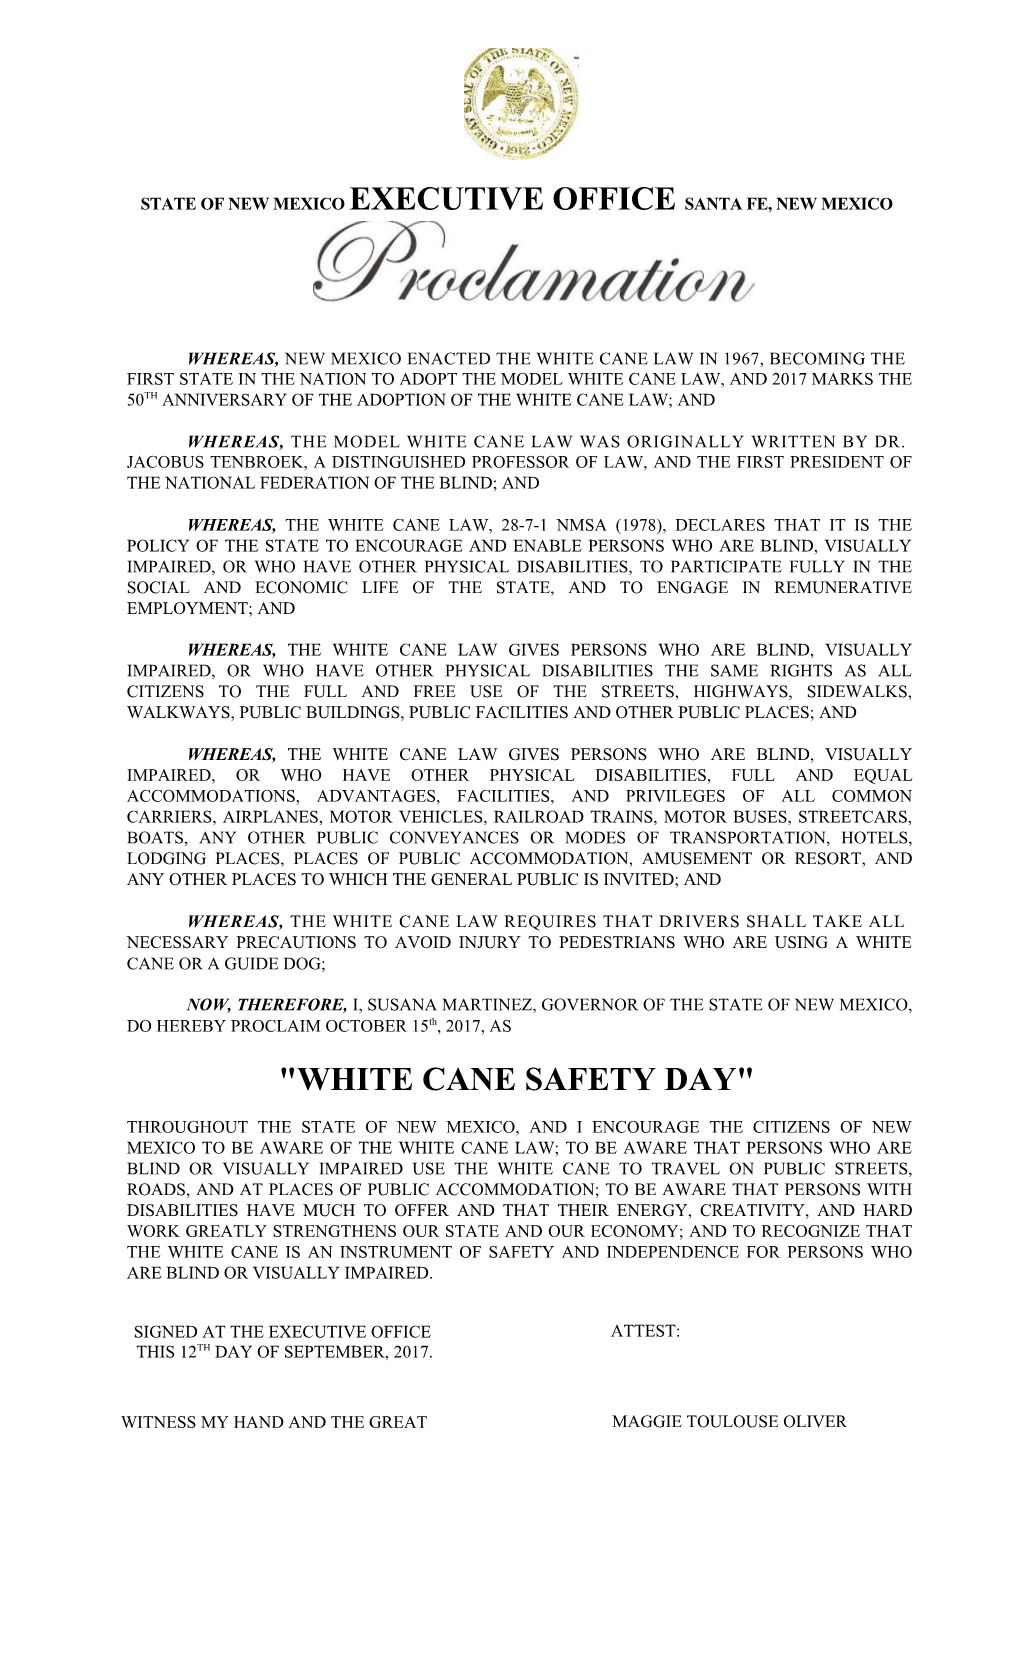 Whereas, New Mexico Enacted the White Cane Law in 1967, Becoming The